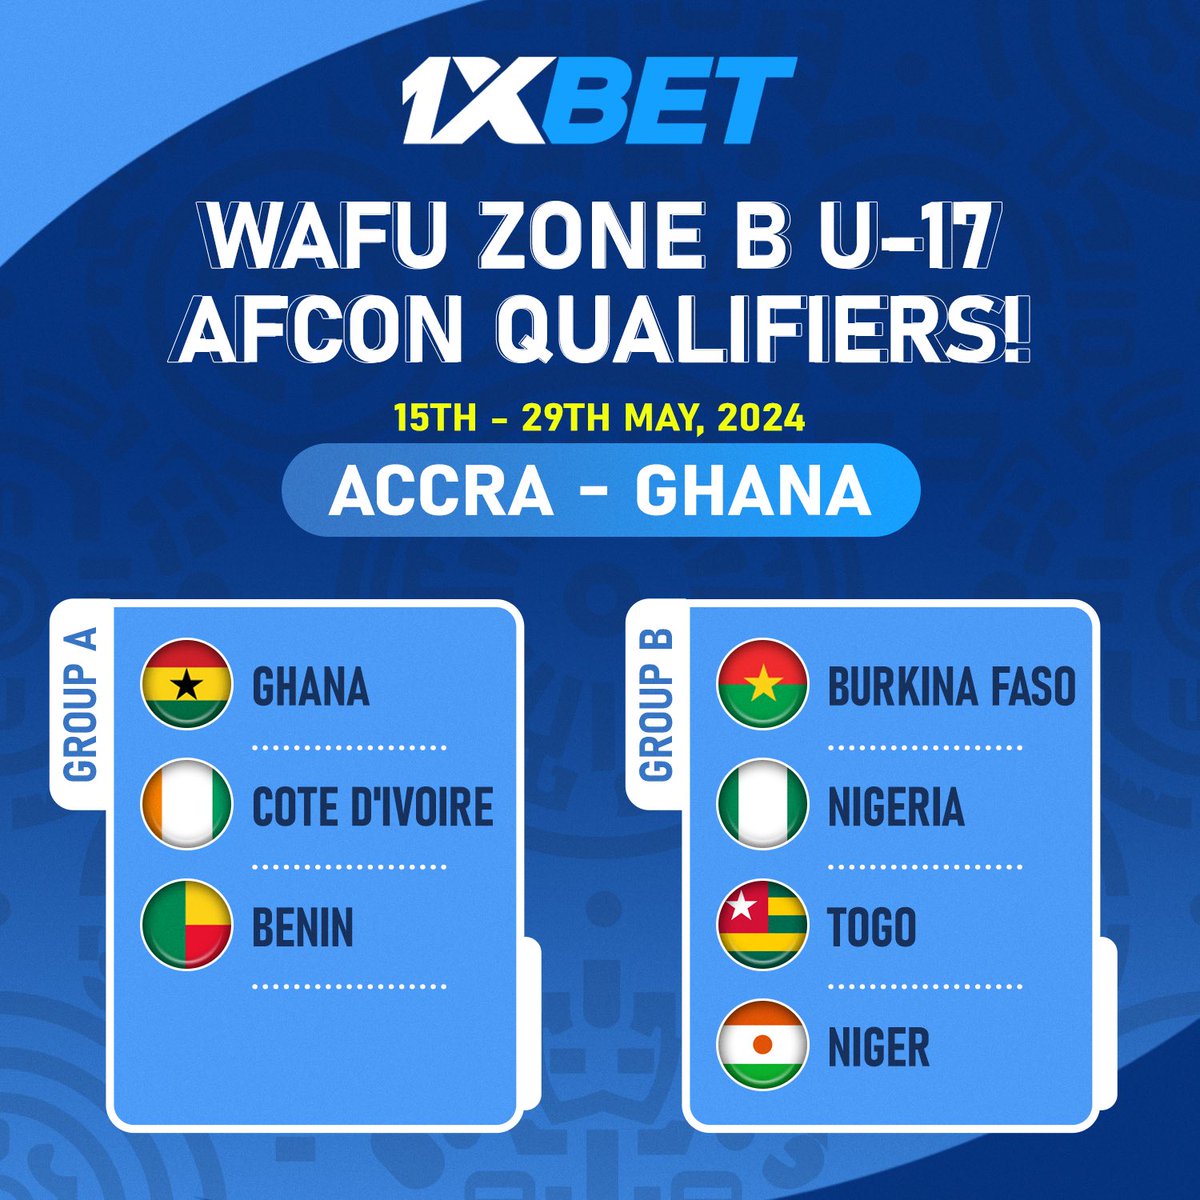 🚨 WAFU Zone B U-17 AFCON Qualifiers Update! 🏆

🗓️ Mark your calendars! The tournament is scheduled to kick off from May 15th to May 28th in Accra.

#WAFU #U17AFCON #FootballFever